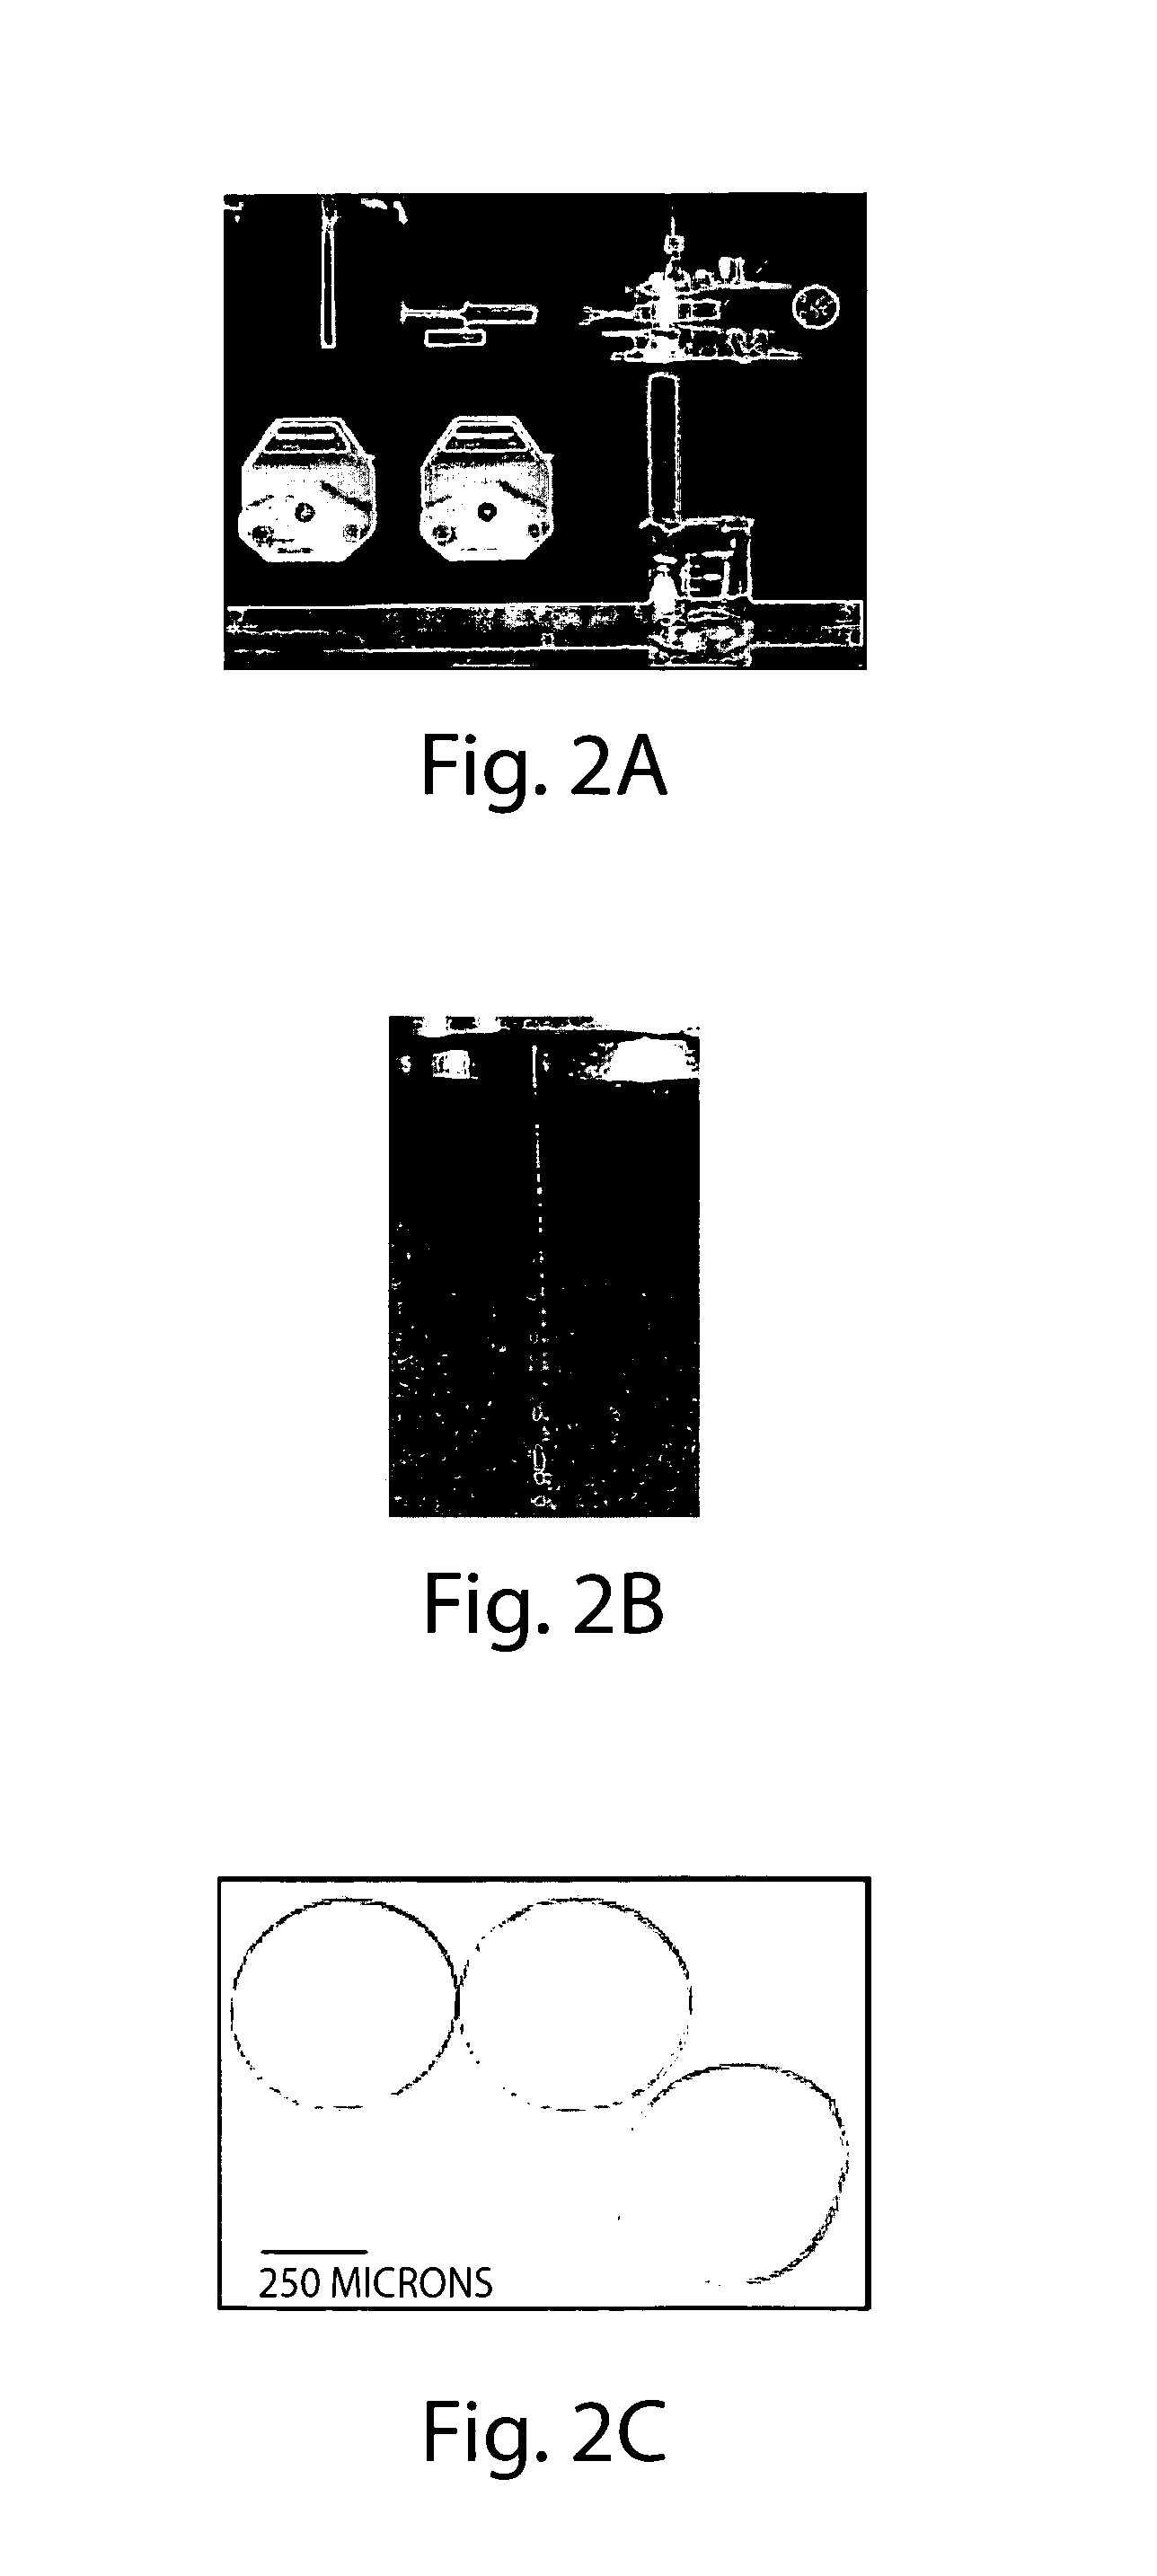 Systems and methods related to degradation of uremic toxins